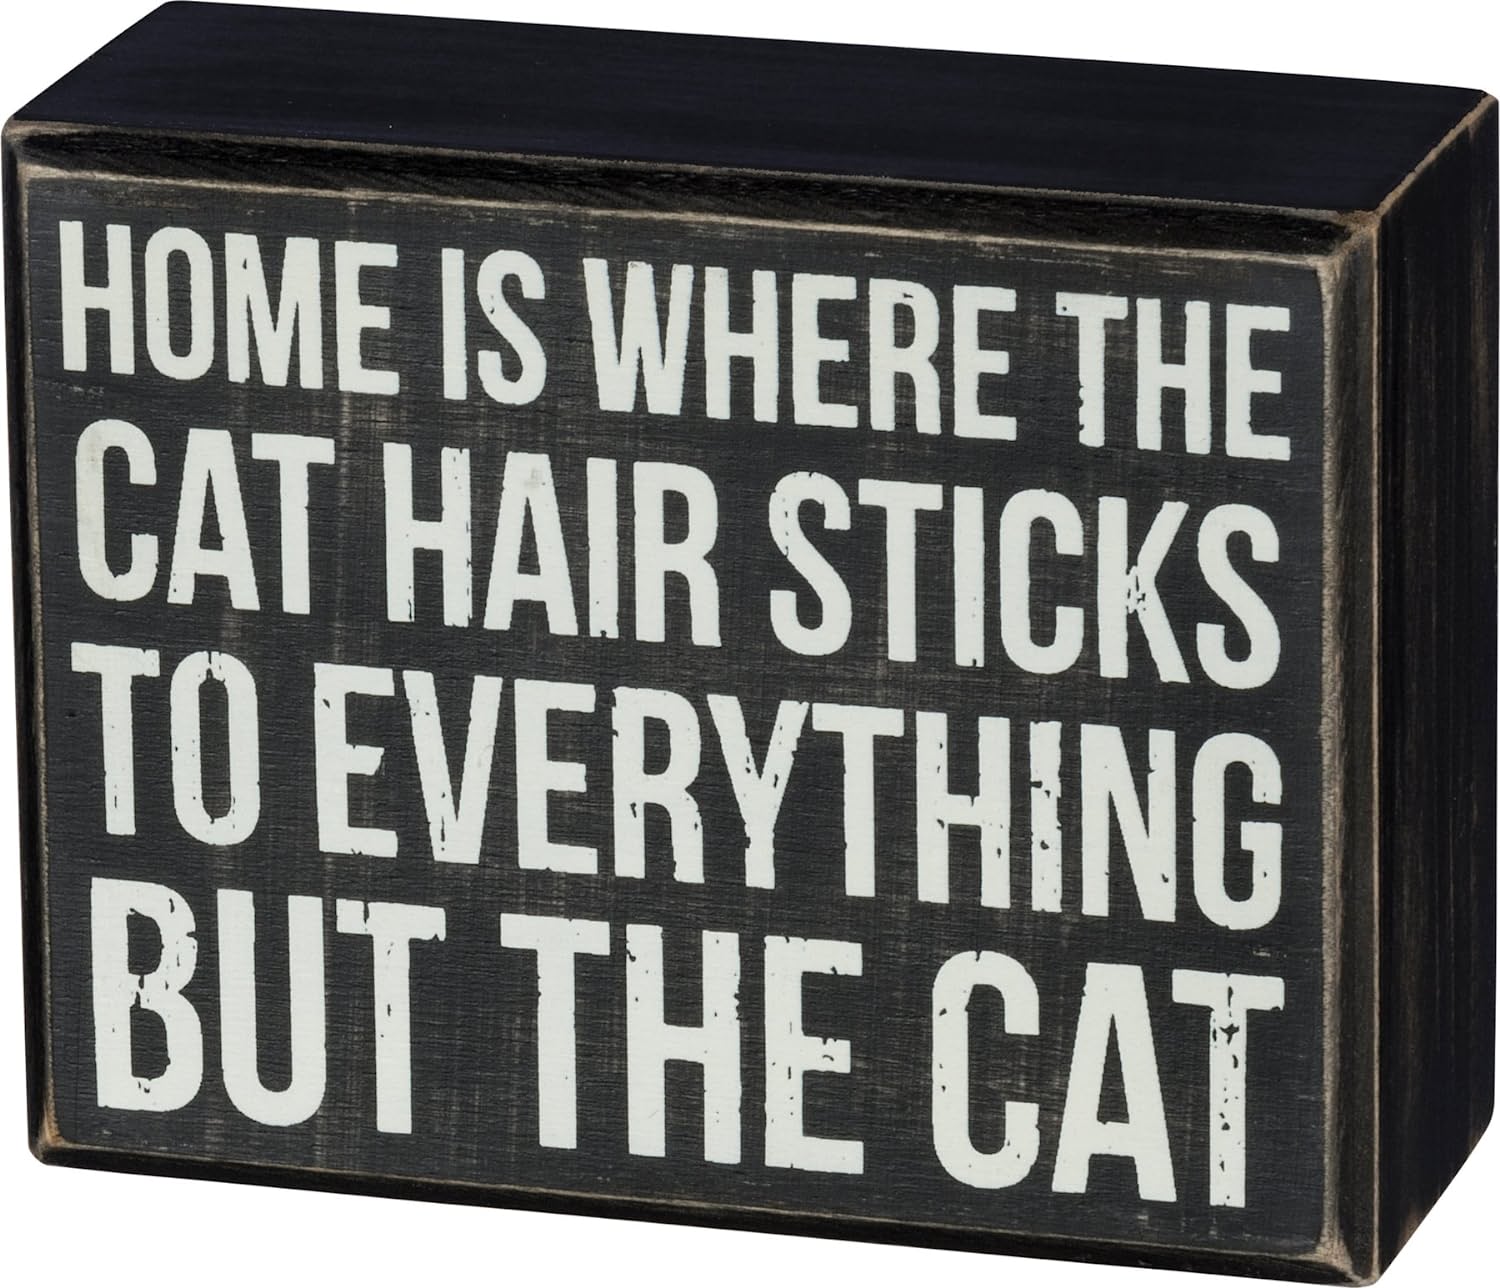 Primitives by Kathy Box Sign – Home is Where The Cat Hair Sticks to Everything But The Cat – Wood, 4.5″ x 3.5″